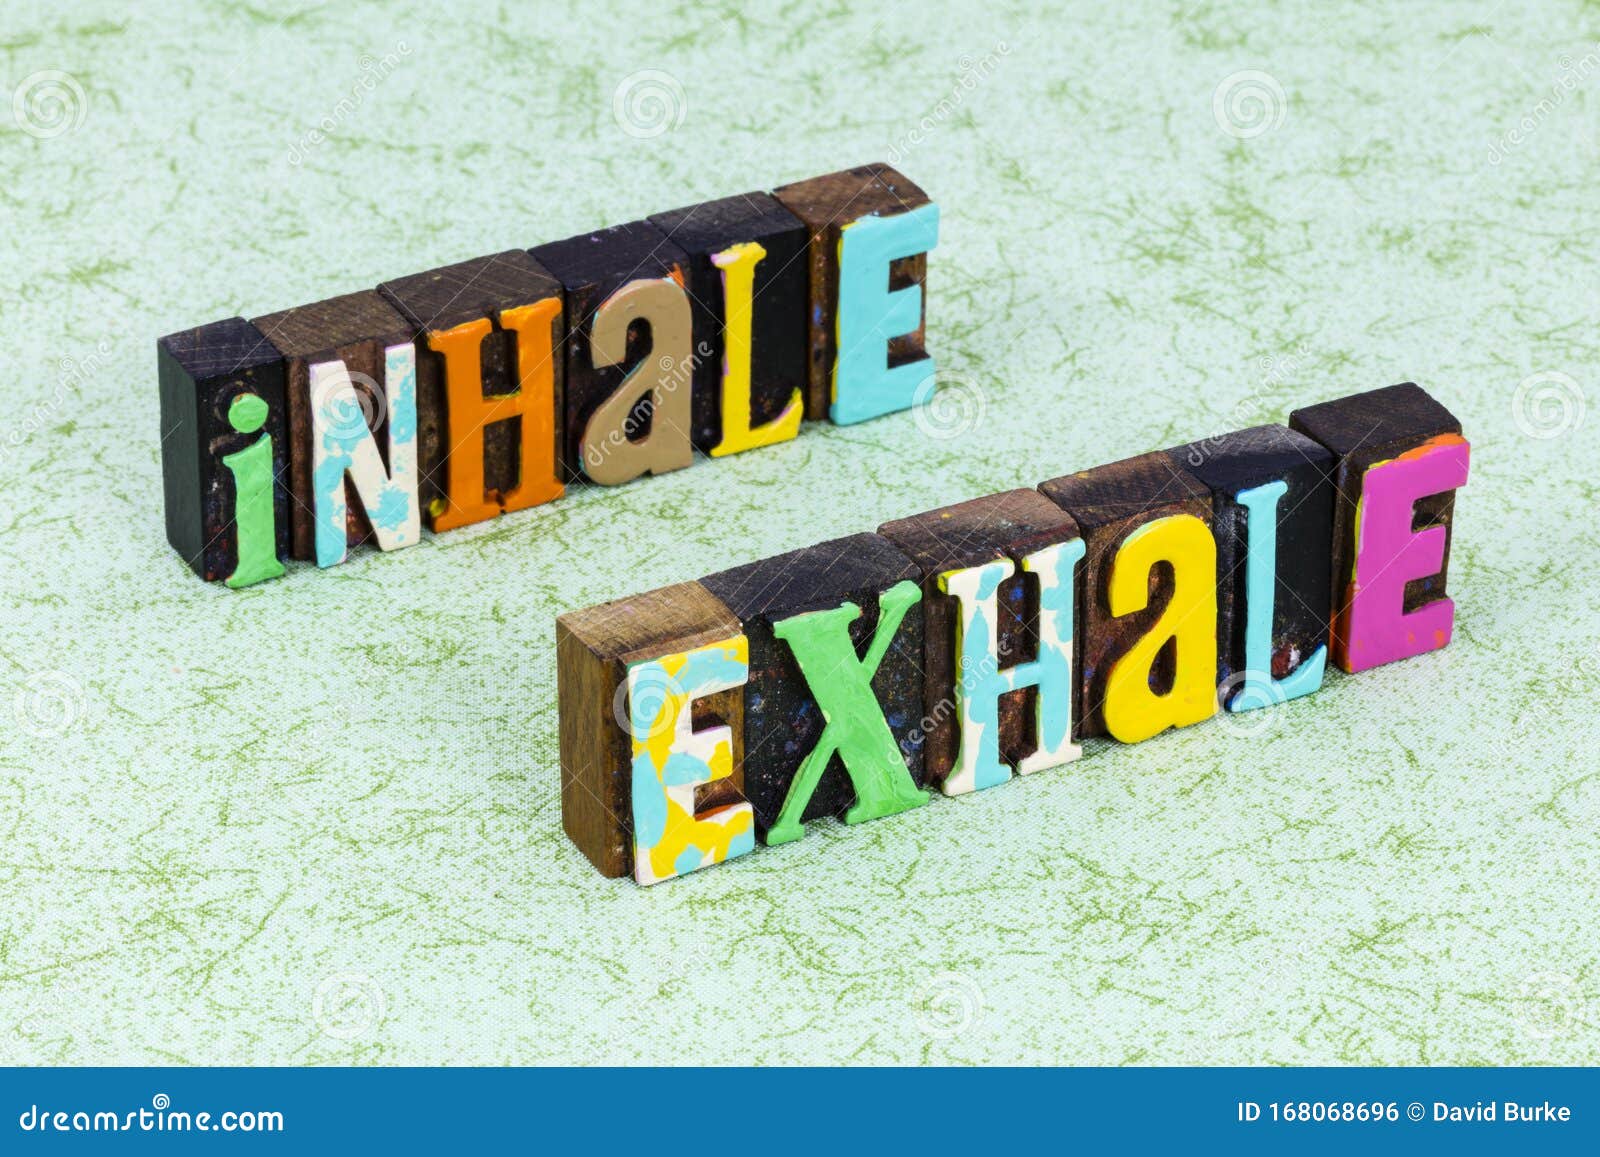 inhale courage exhale yoga breathe slow down relax meditation